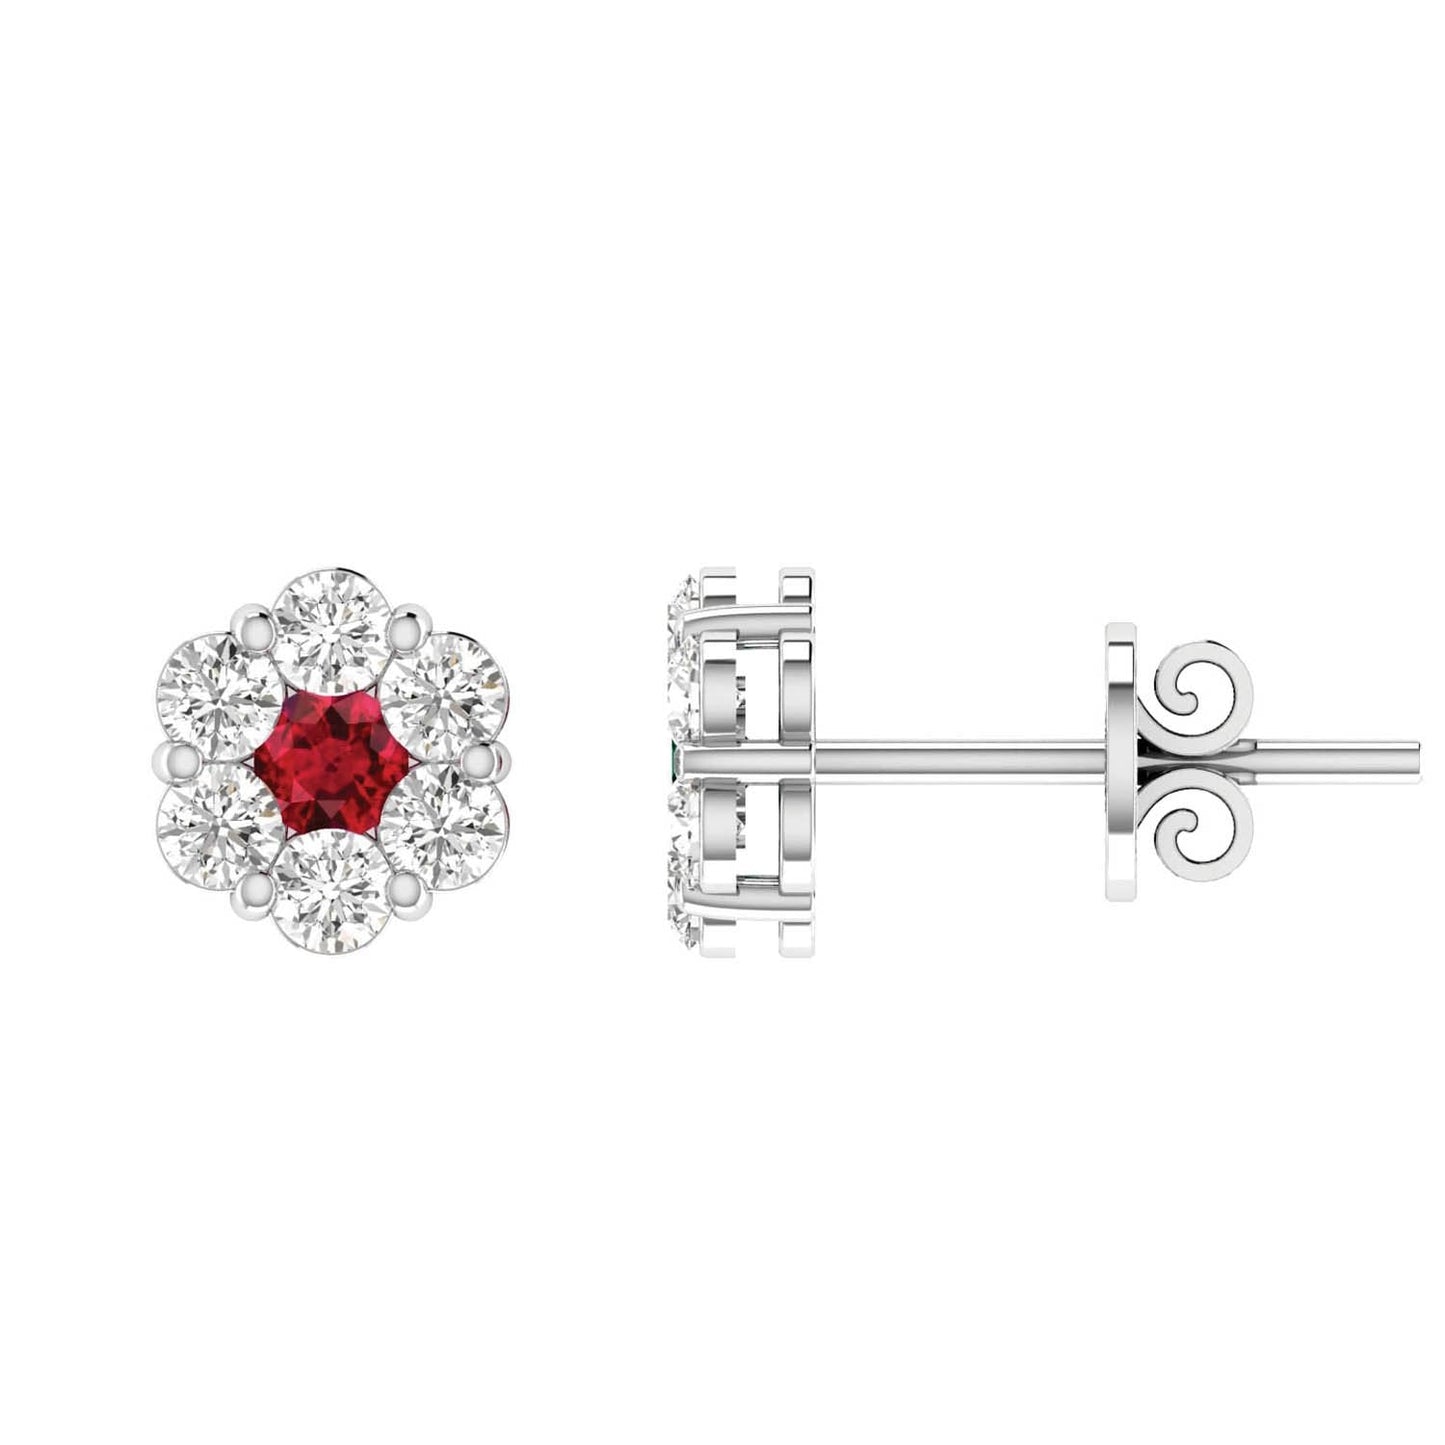 Ruby Diamond Earrings with 0.37ct Diamonds in 9K White Gold - 9WRE50GHR